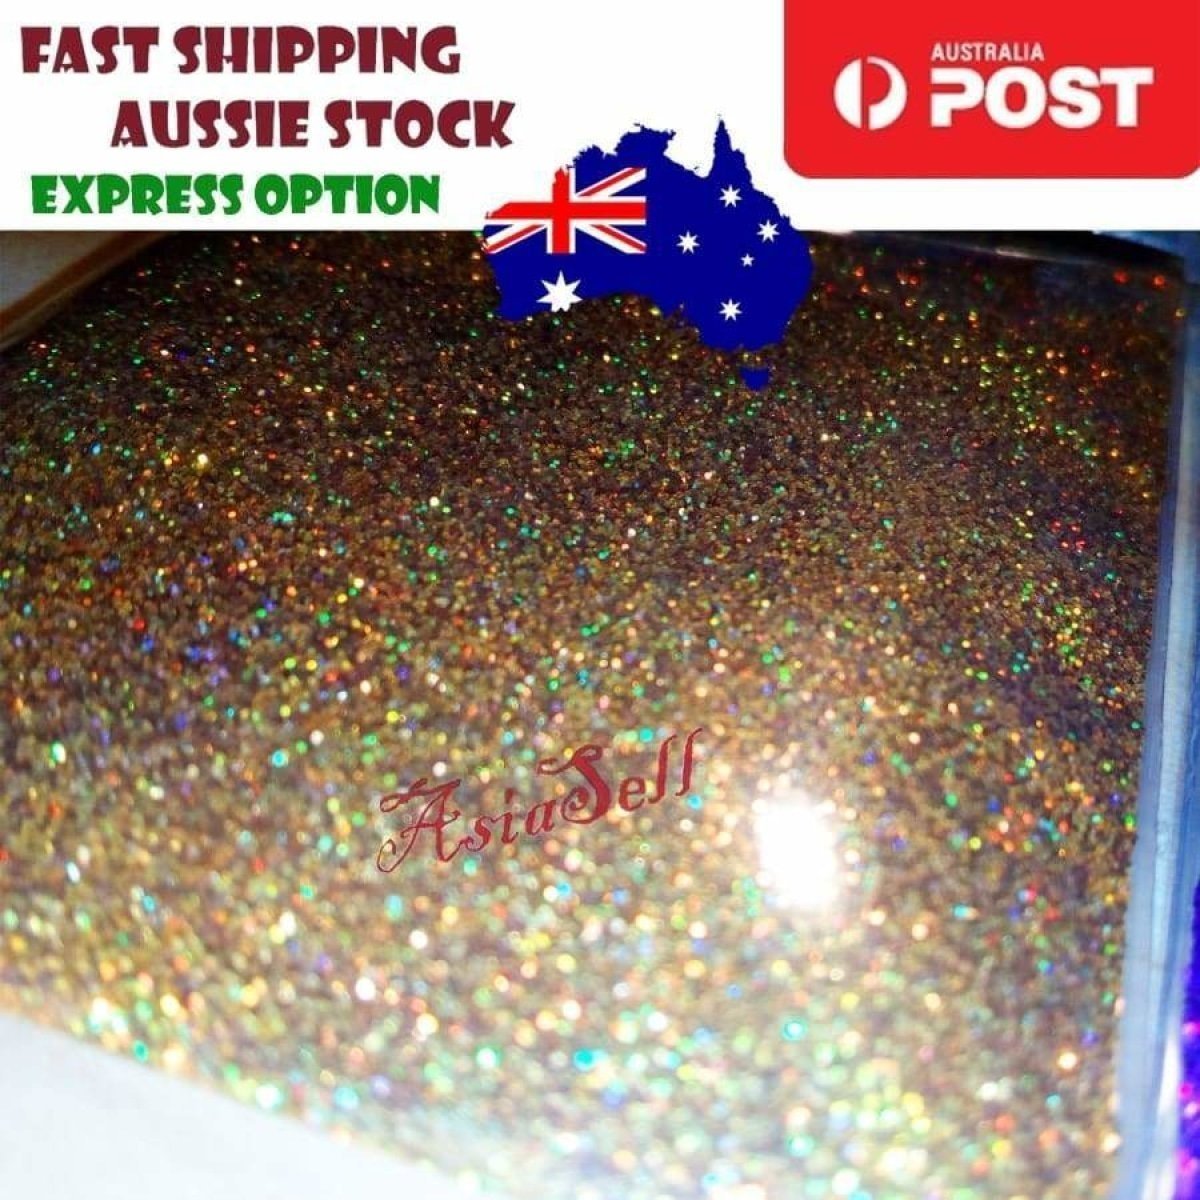 10g Holographic Nail Art Decals Silver Gold Stars Butterflies Bling Decorations 0.2mm - Gold fine powder - - Asia Sell